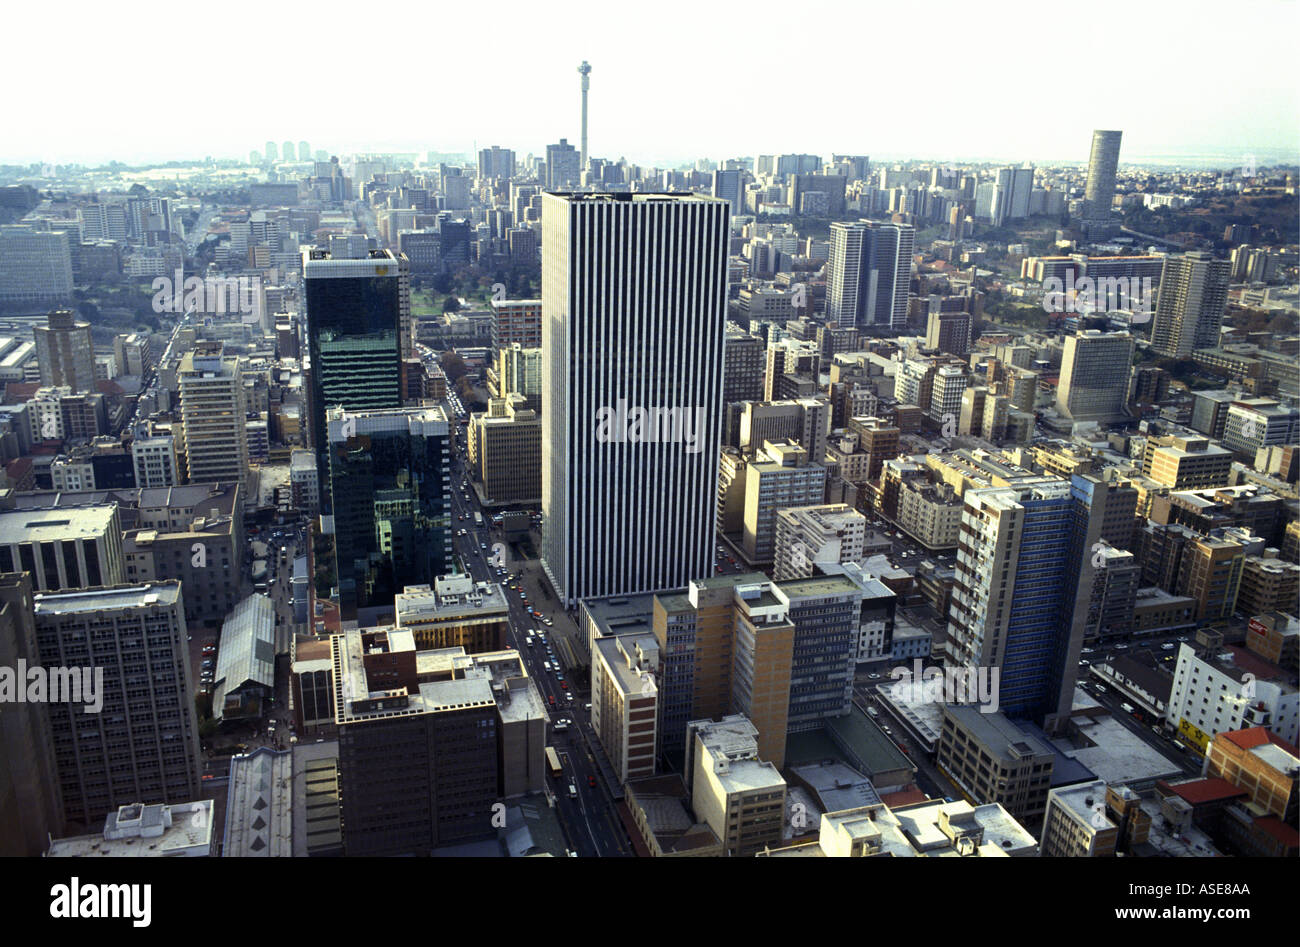 Johannesburg city centre from the top of Carlton Tower the tallest building in South Africa Stock Photo